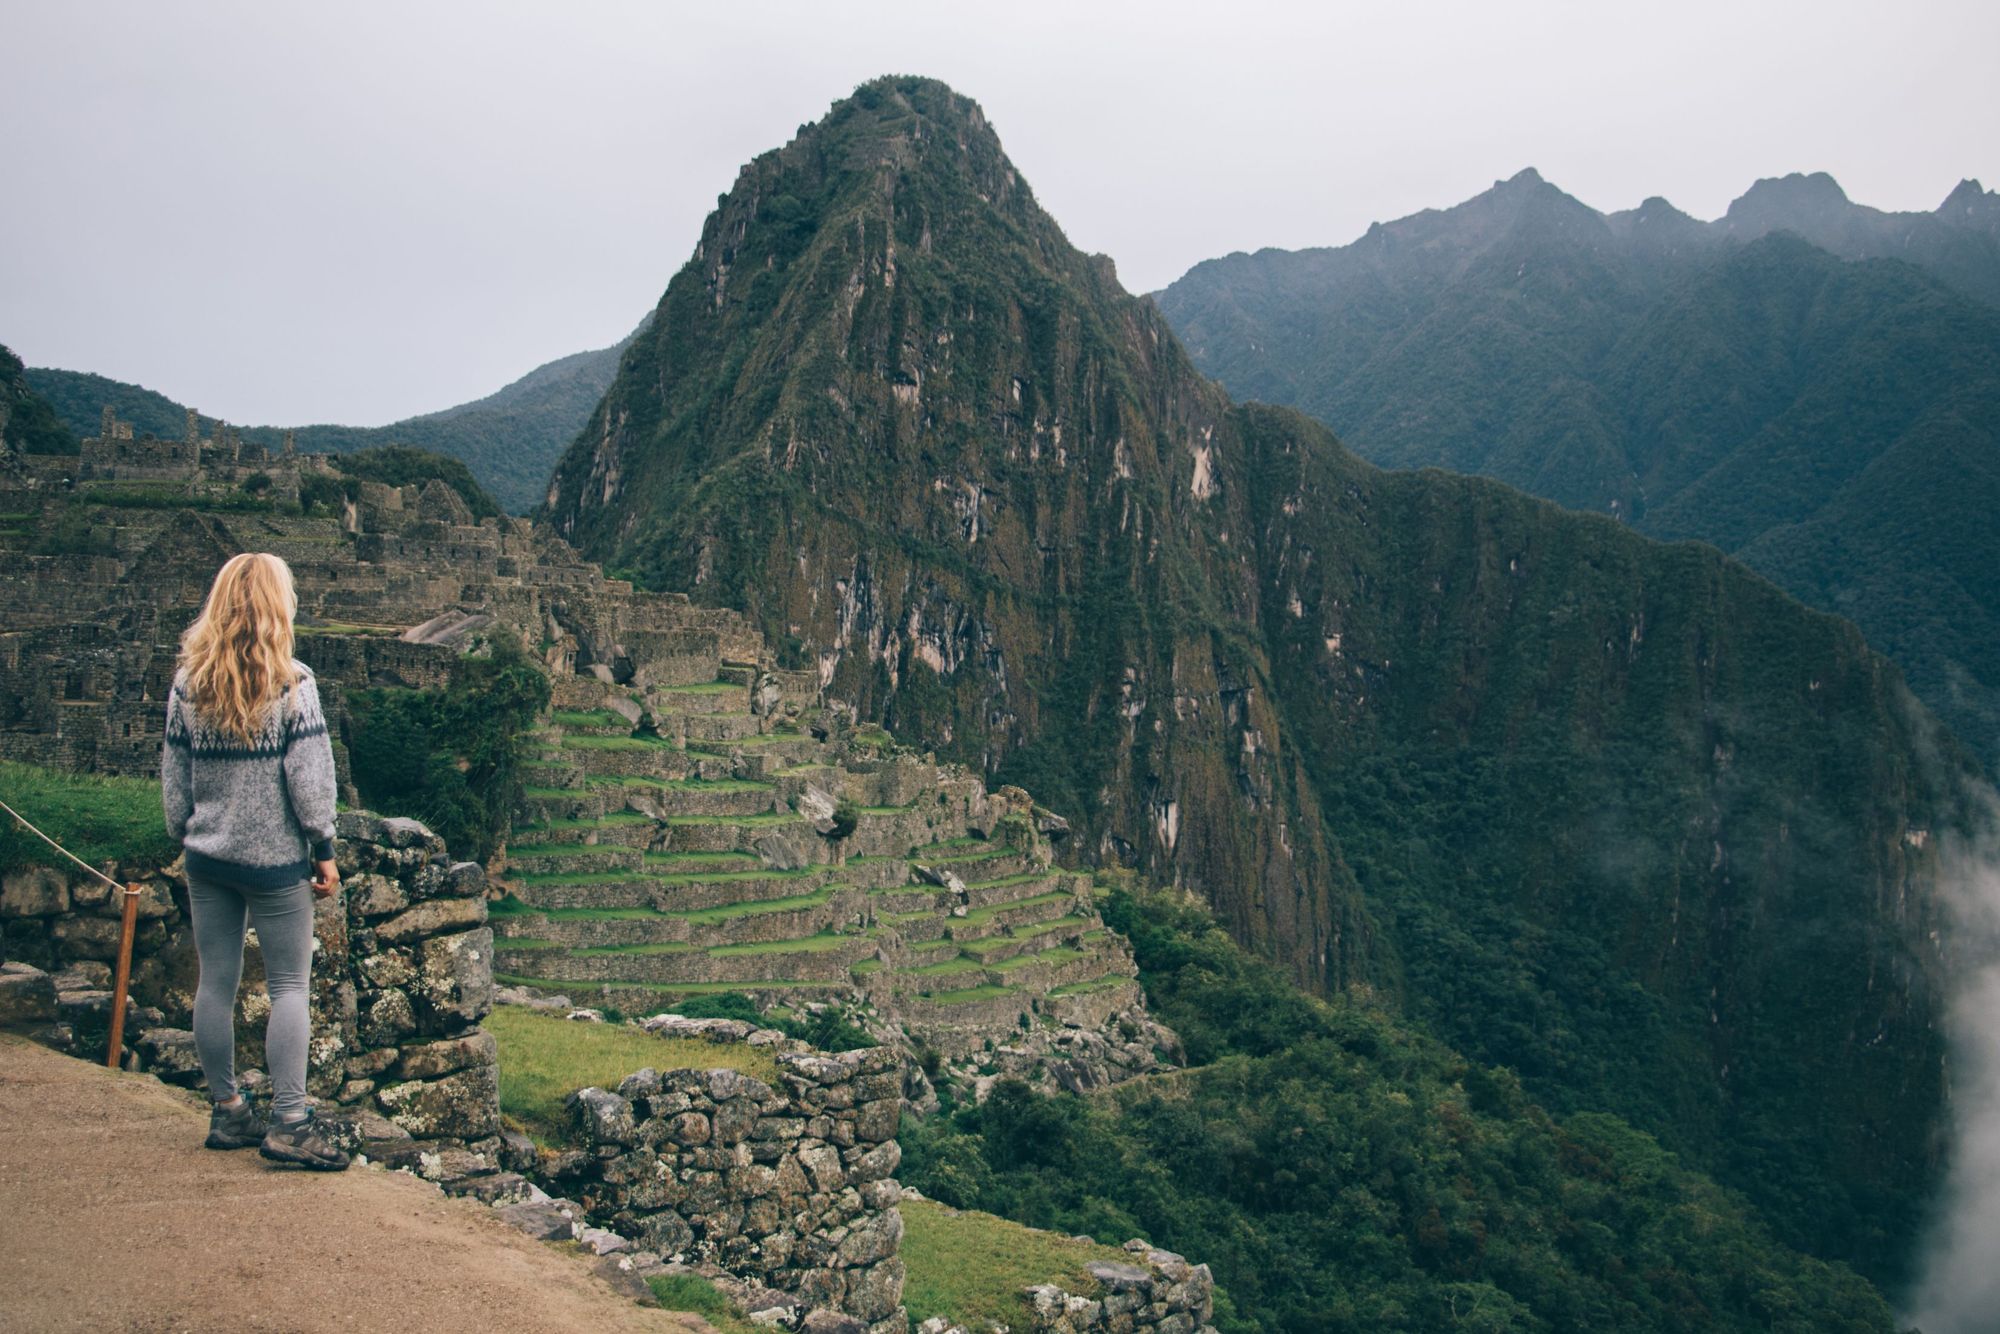 Gazing out on the mountains surrounding Machu Picchu on the final day on the route. Photo: Getty